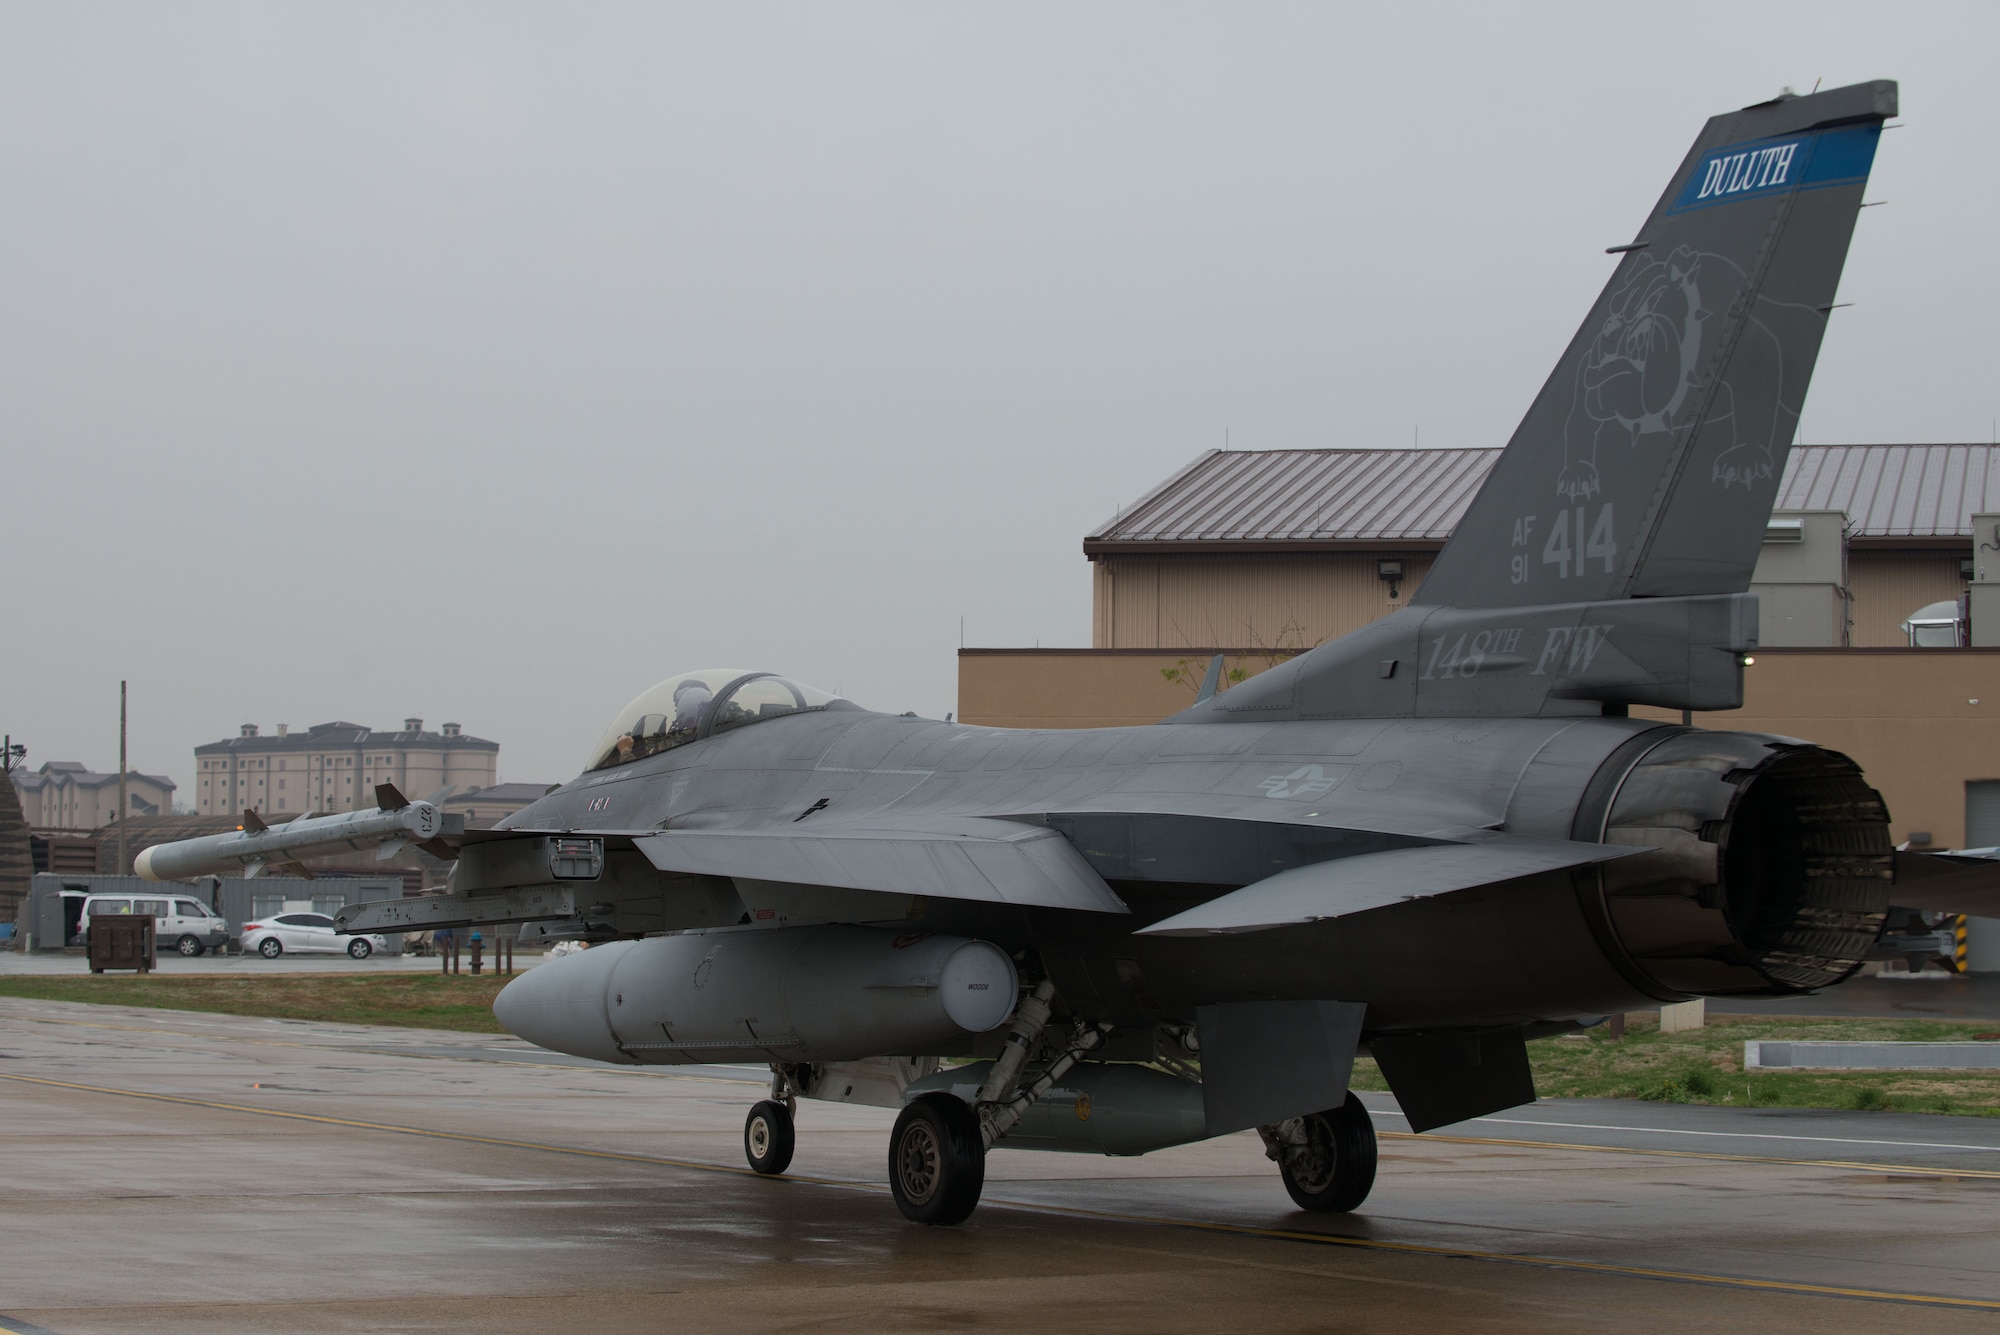 An F-16 Fighting Falcon from the 148th Fighter Wing taxis on the flightline after arriving to Osan Air Base, Republic of Korea, April 20, 2016. The 148th FW out of Duluth Air National Guard Base, Minnesota, deployed 12 F-16 aircraft to Osan as part of a theater security package to enhance regional security on the Korea Peninsula. The U.S. Air Force routinely deploys force packages of fighters throughout the Republic of Korea to demonstrate the U.S. commitment to stability on the Korea Peninsula. (U.S. Air Force photo by Senior Airman Dillian Bamman/Released)